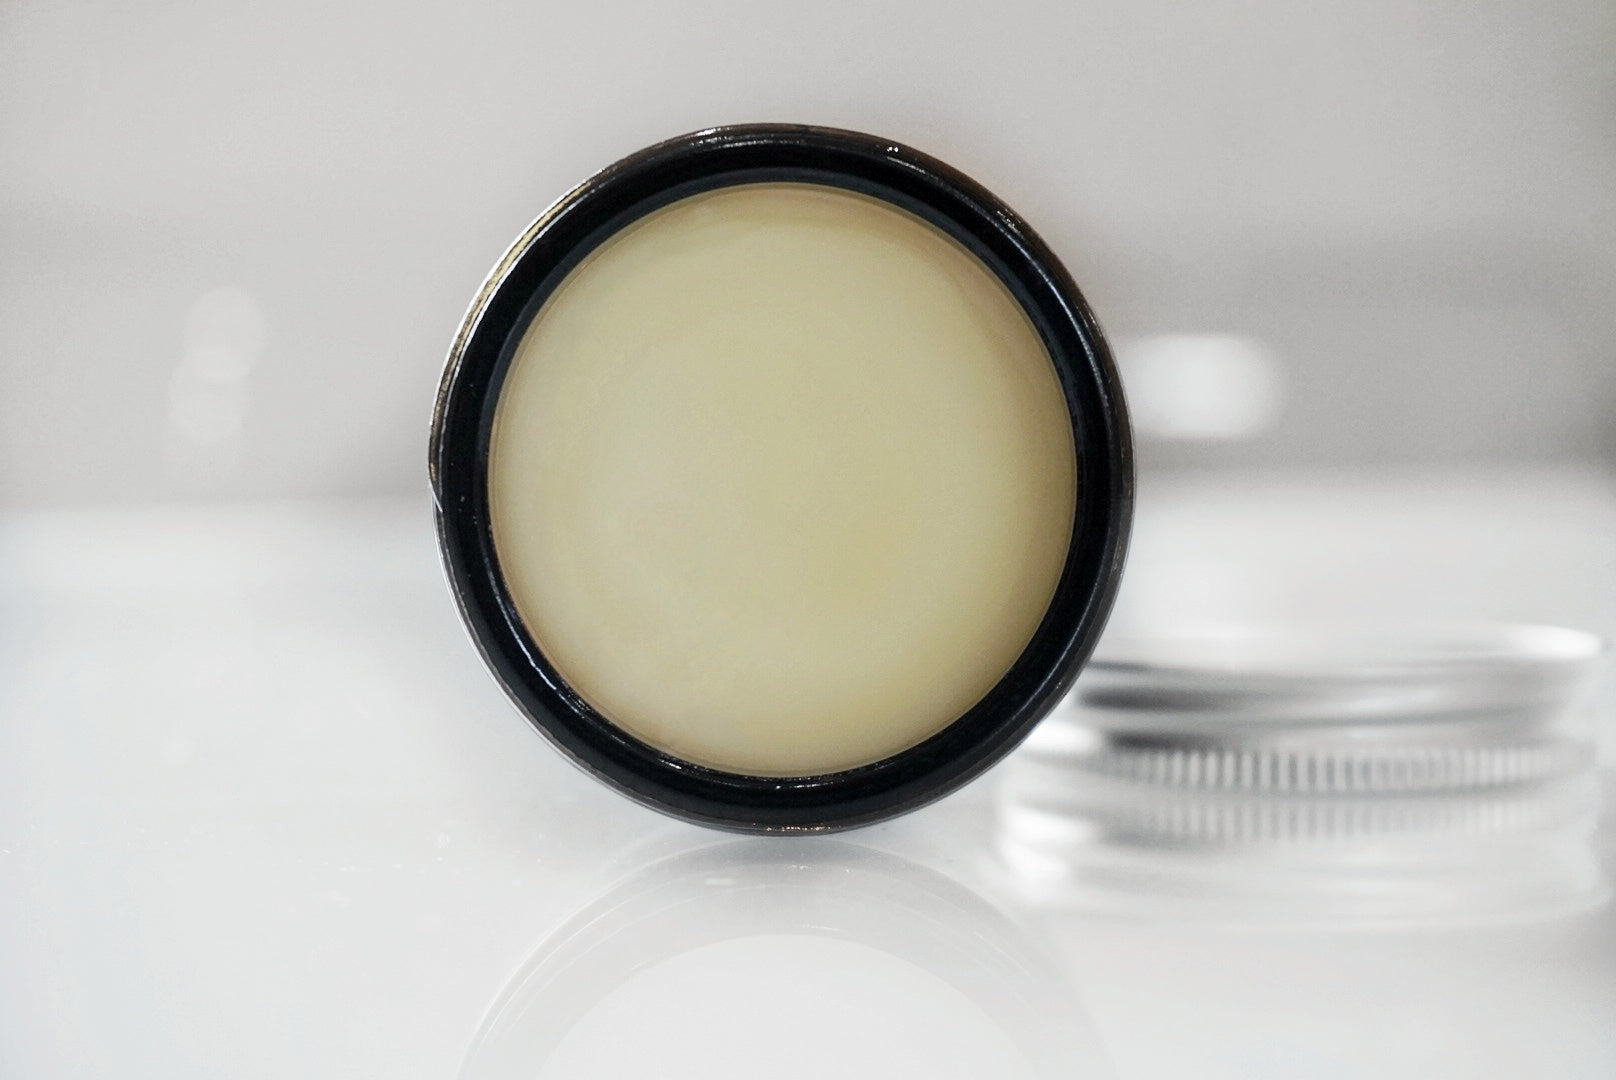 grzzly scented beard balm for styling and softening